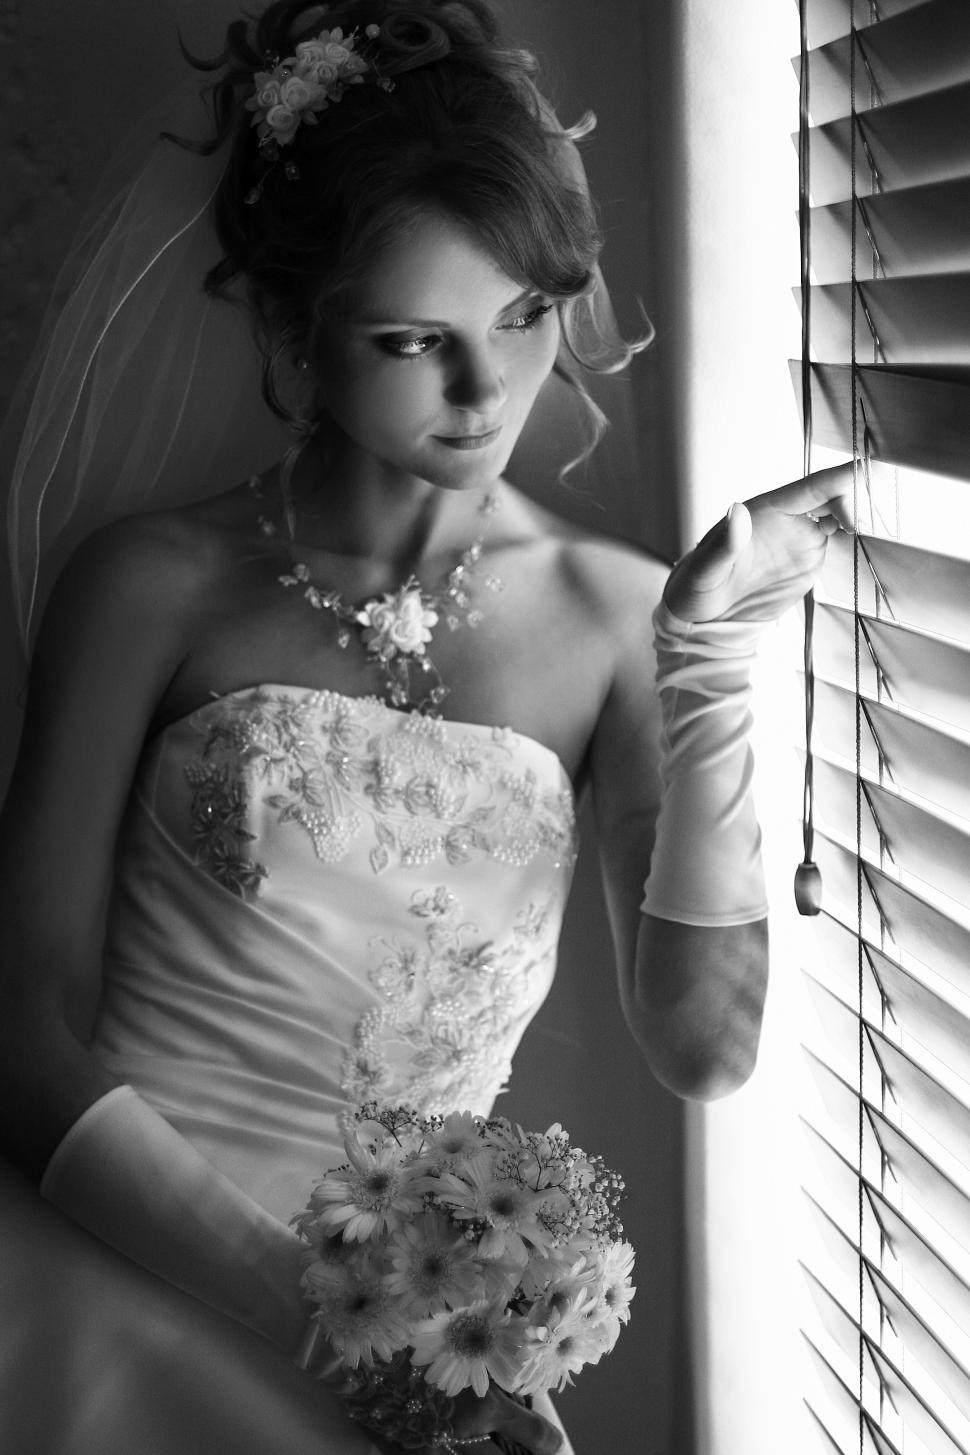 Free Image of Bride looking out a window, black and white 